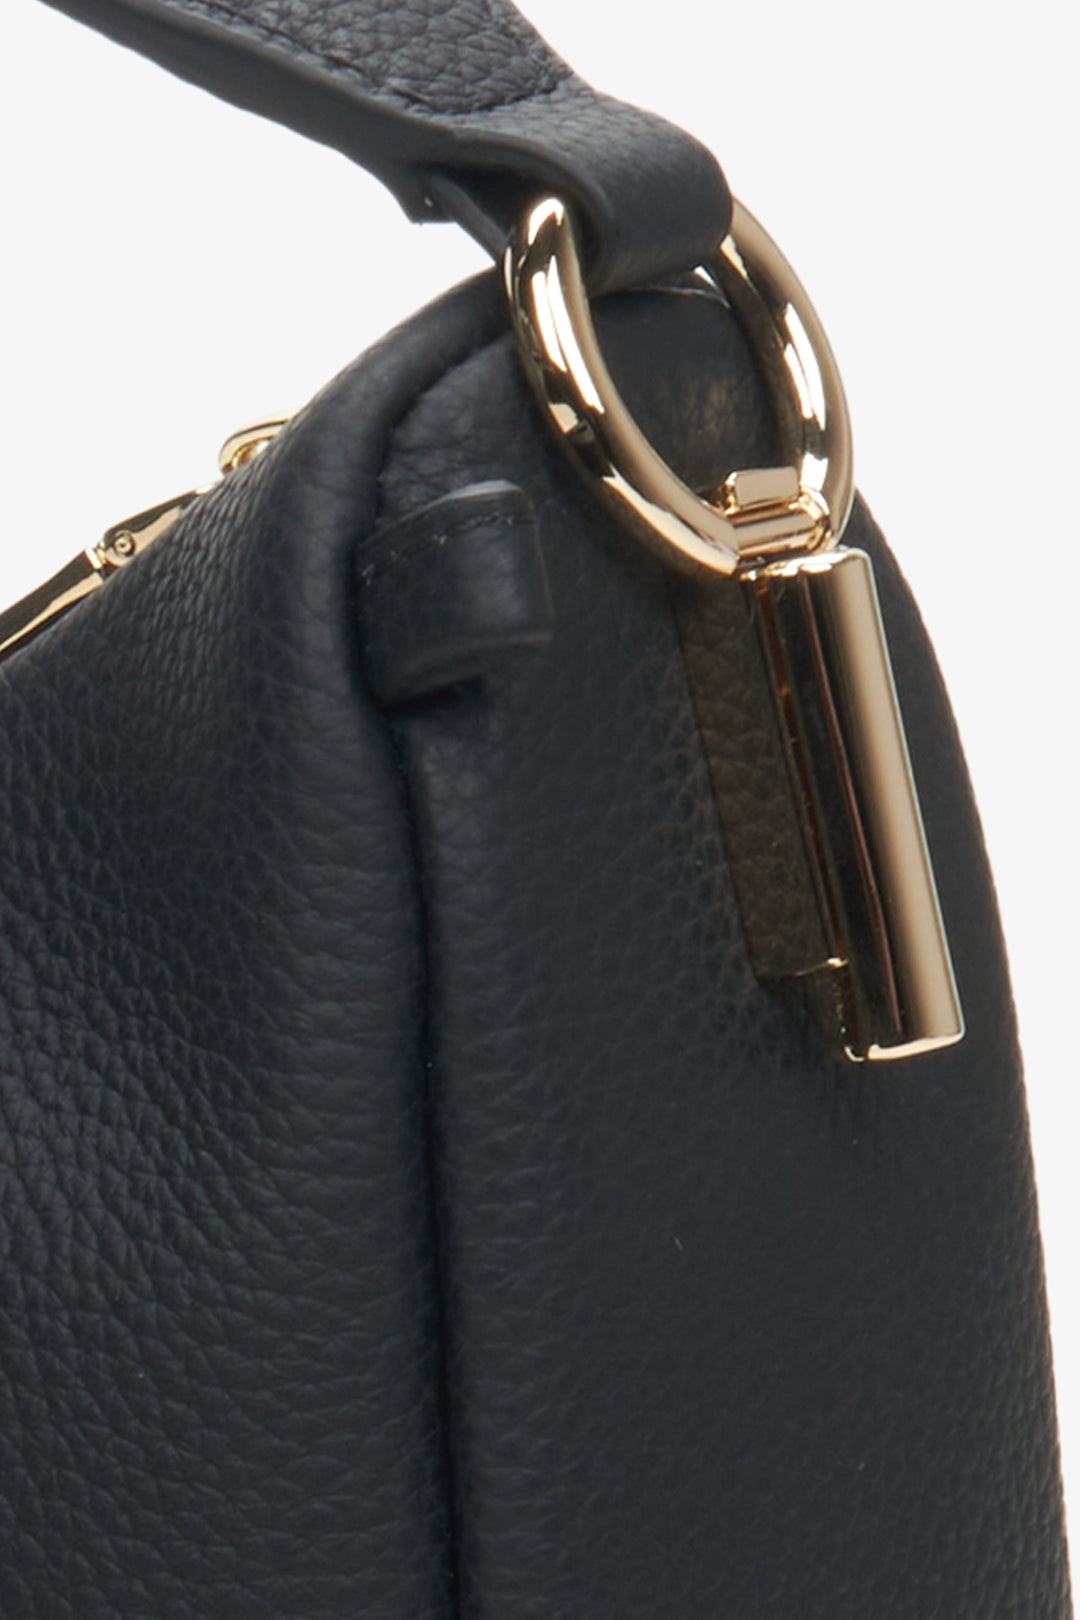 Close-up of the interior of the black leather women's crescent-shaped handbag by Estro.